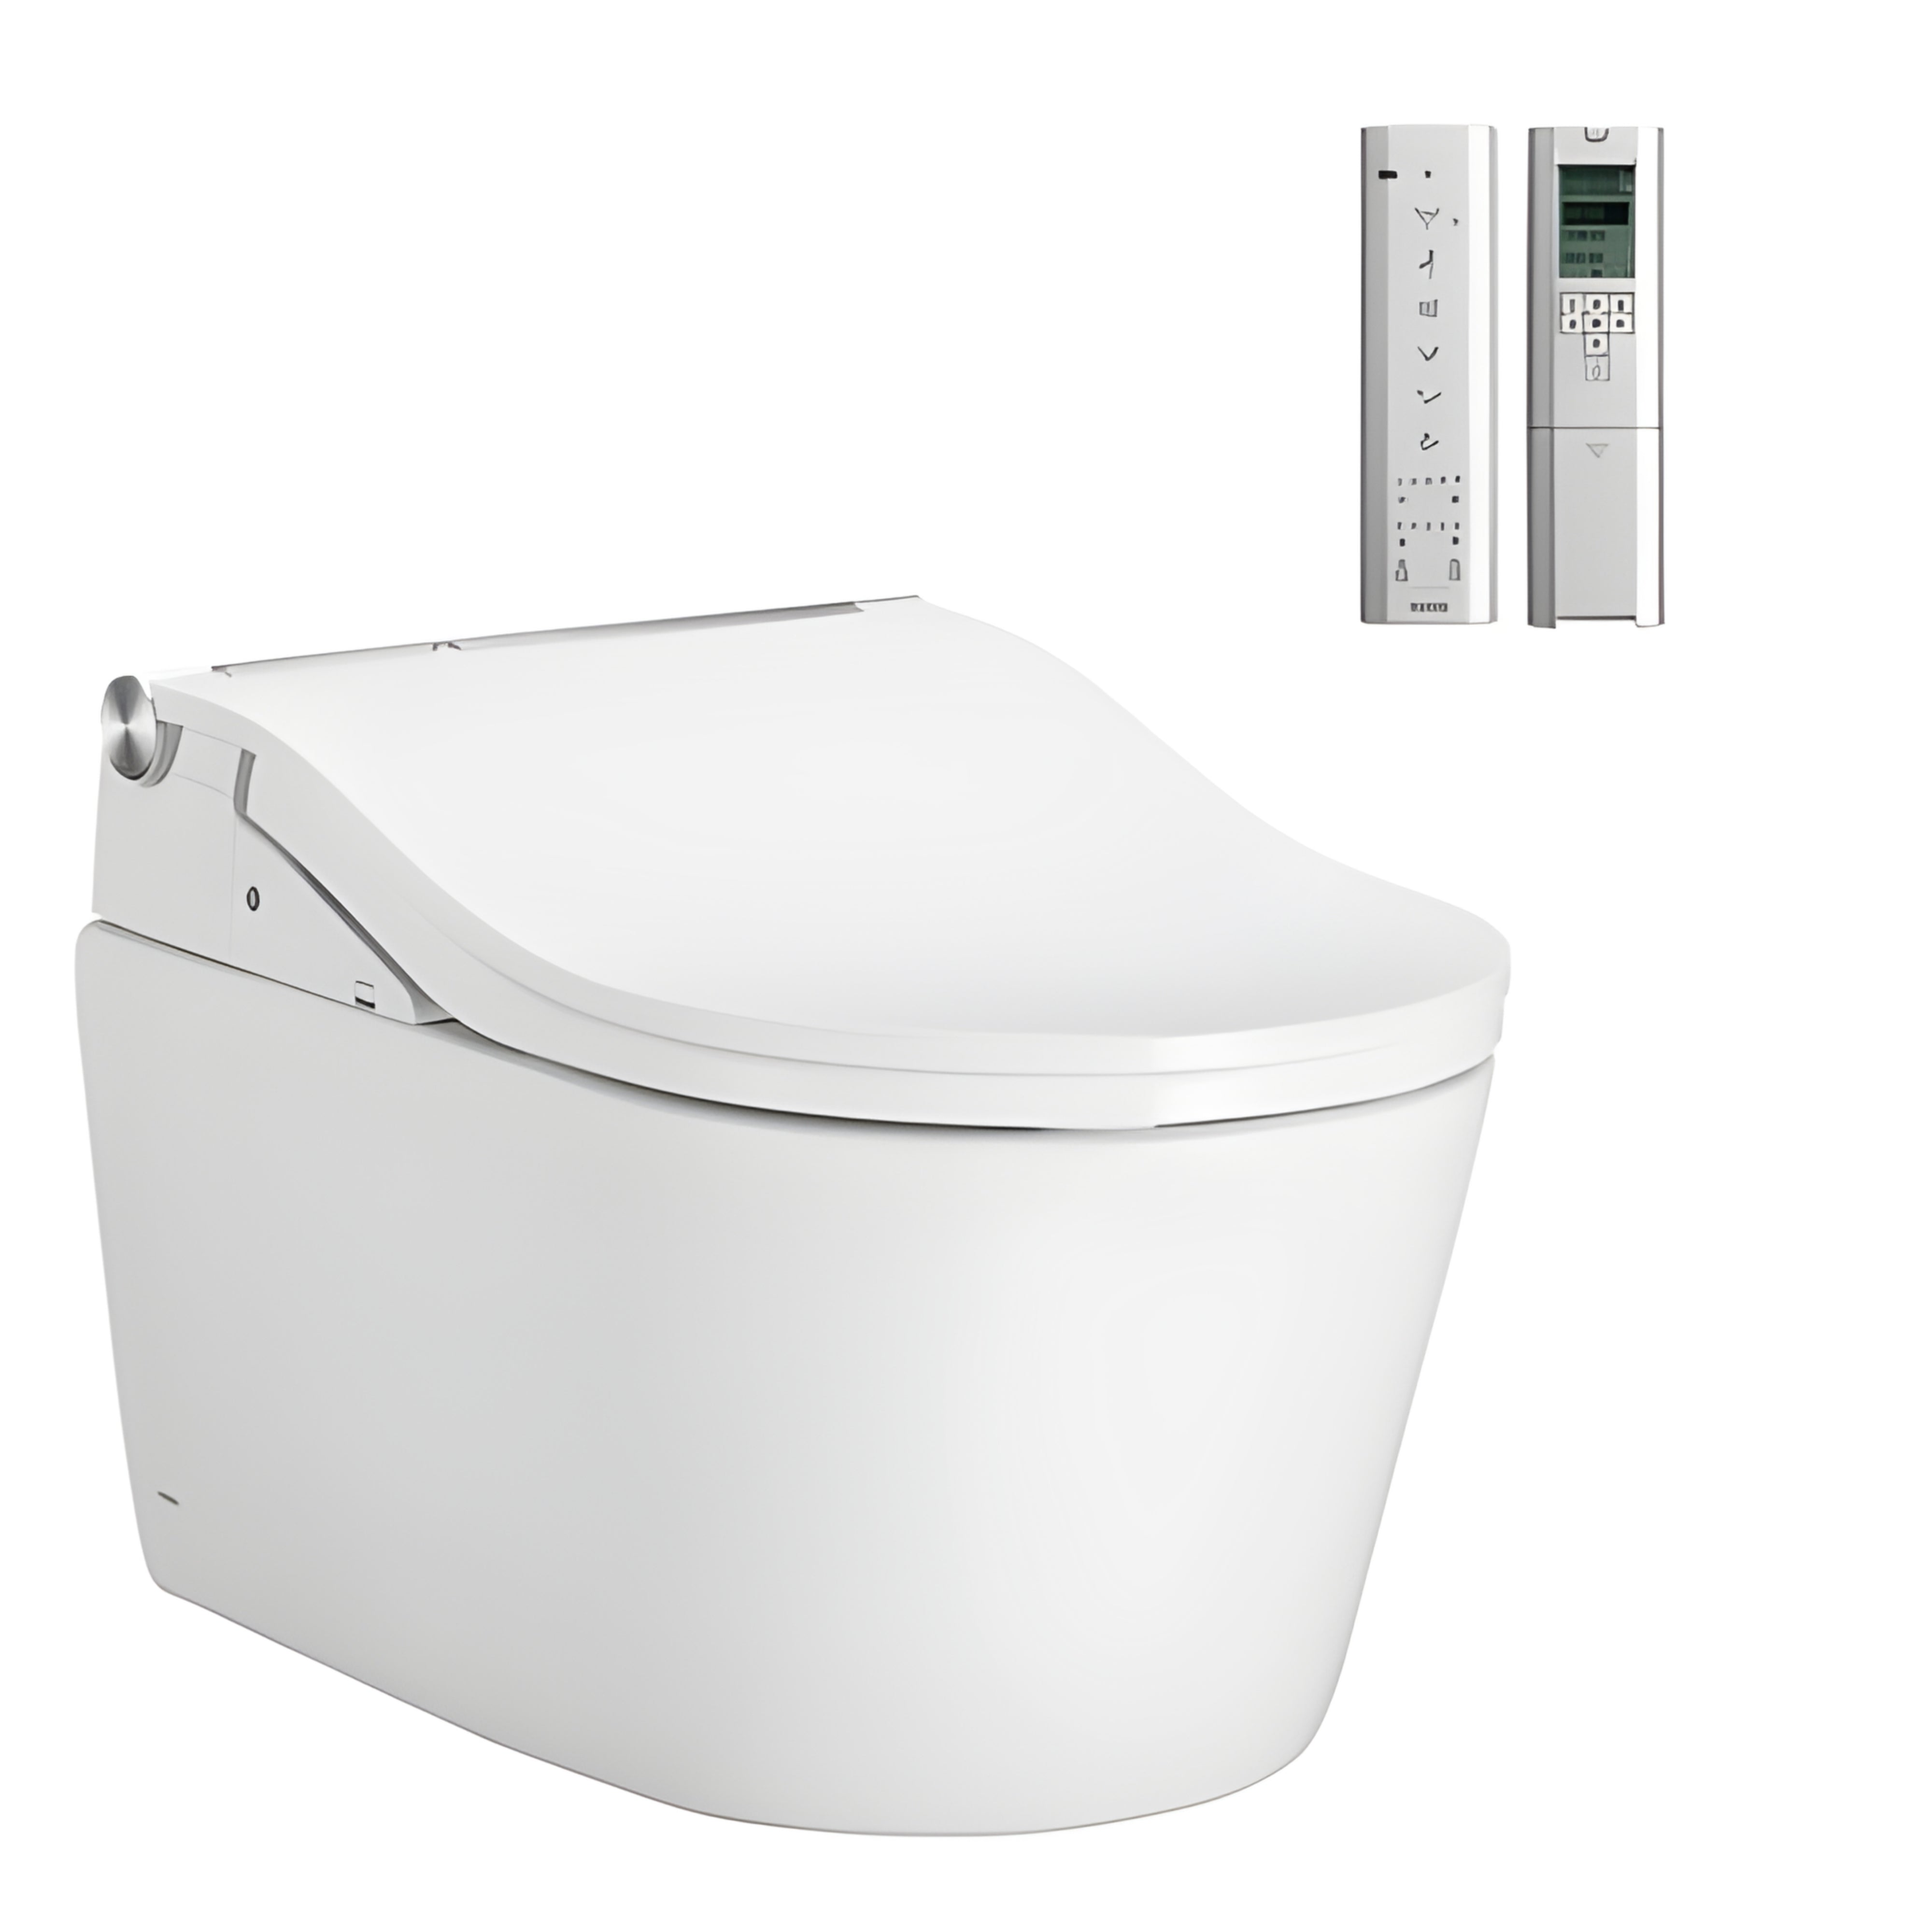 TOTO RW WALL HUNG TOILET WITH WASHLET PACKAGE W/ AUTOLID AND AUTOFLUSH (D-SHAPE) GLOSS WHITE